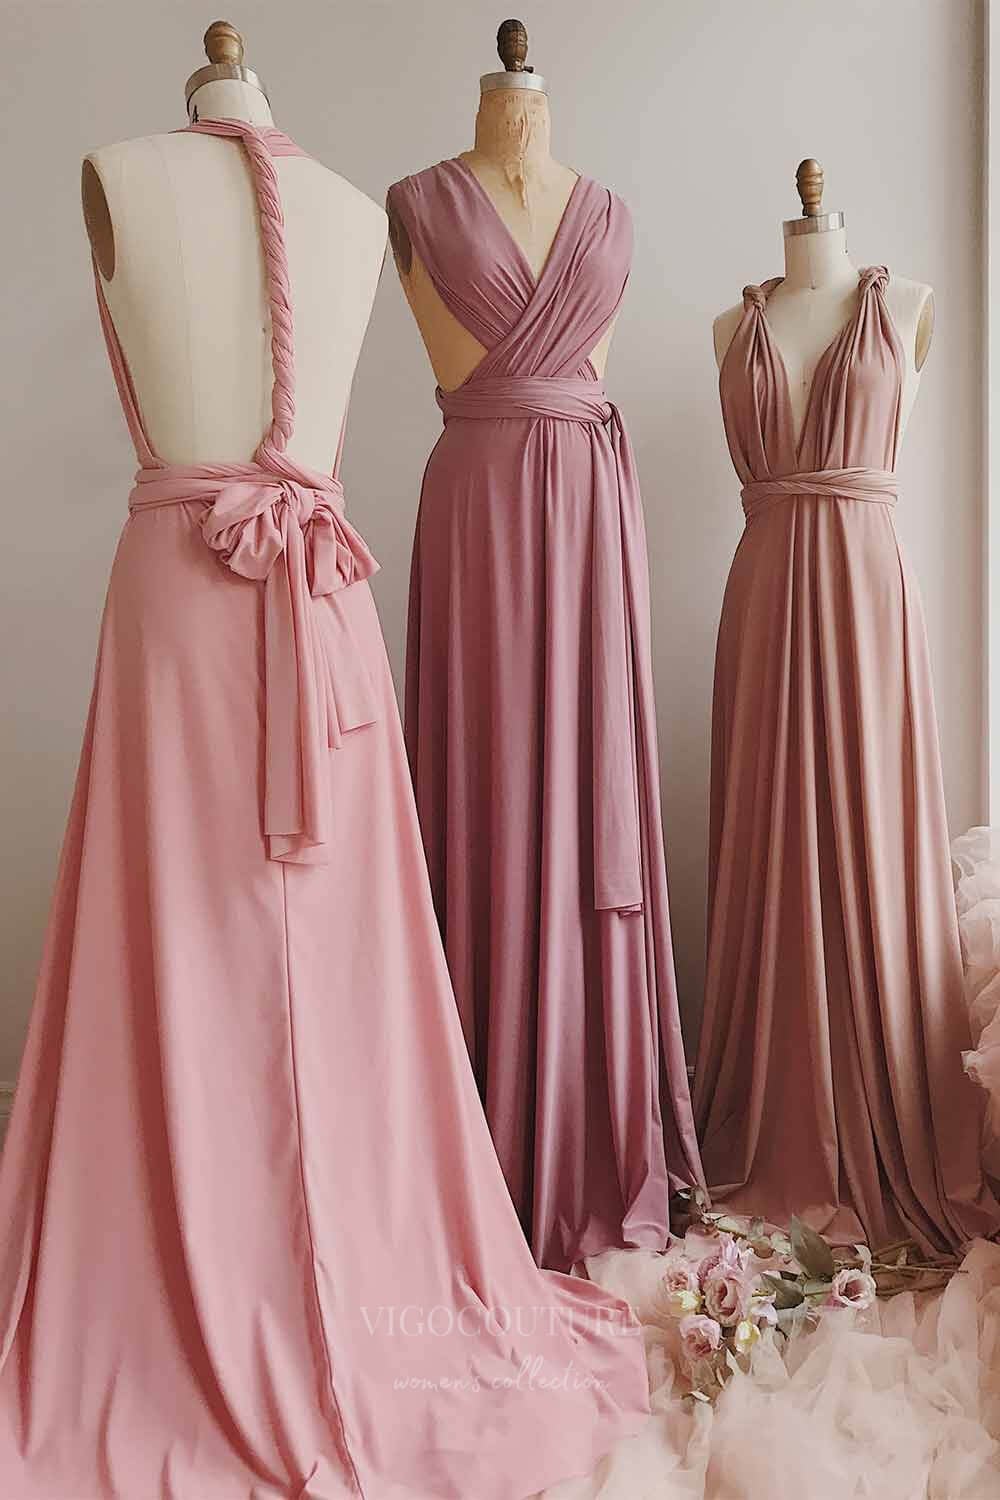 vigocouture-Convertible Bridesmaid Dress Stretchable Woven Dress Pleated Prom Dress Multiway Dress 20860-Hot Pink-Prom Dresses-vigocouture-Custom Colors-US2-